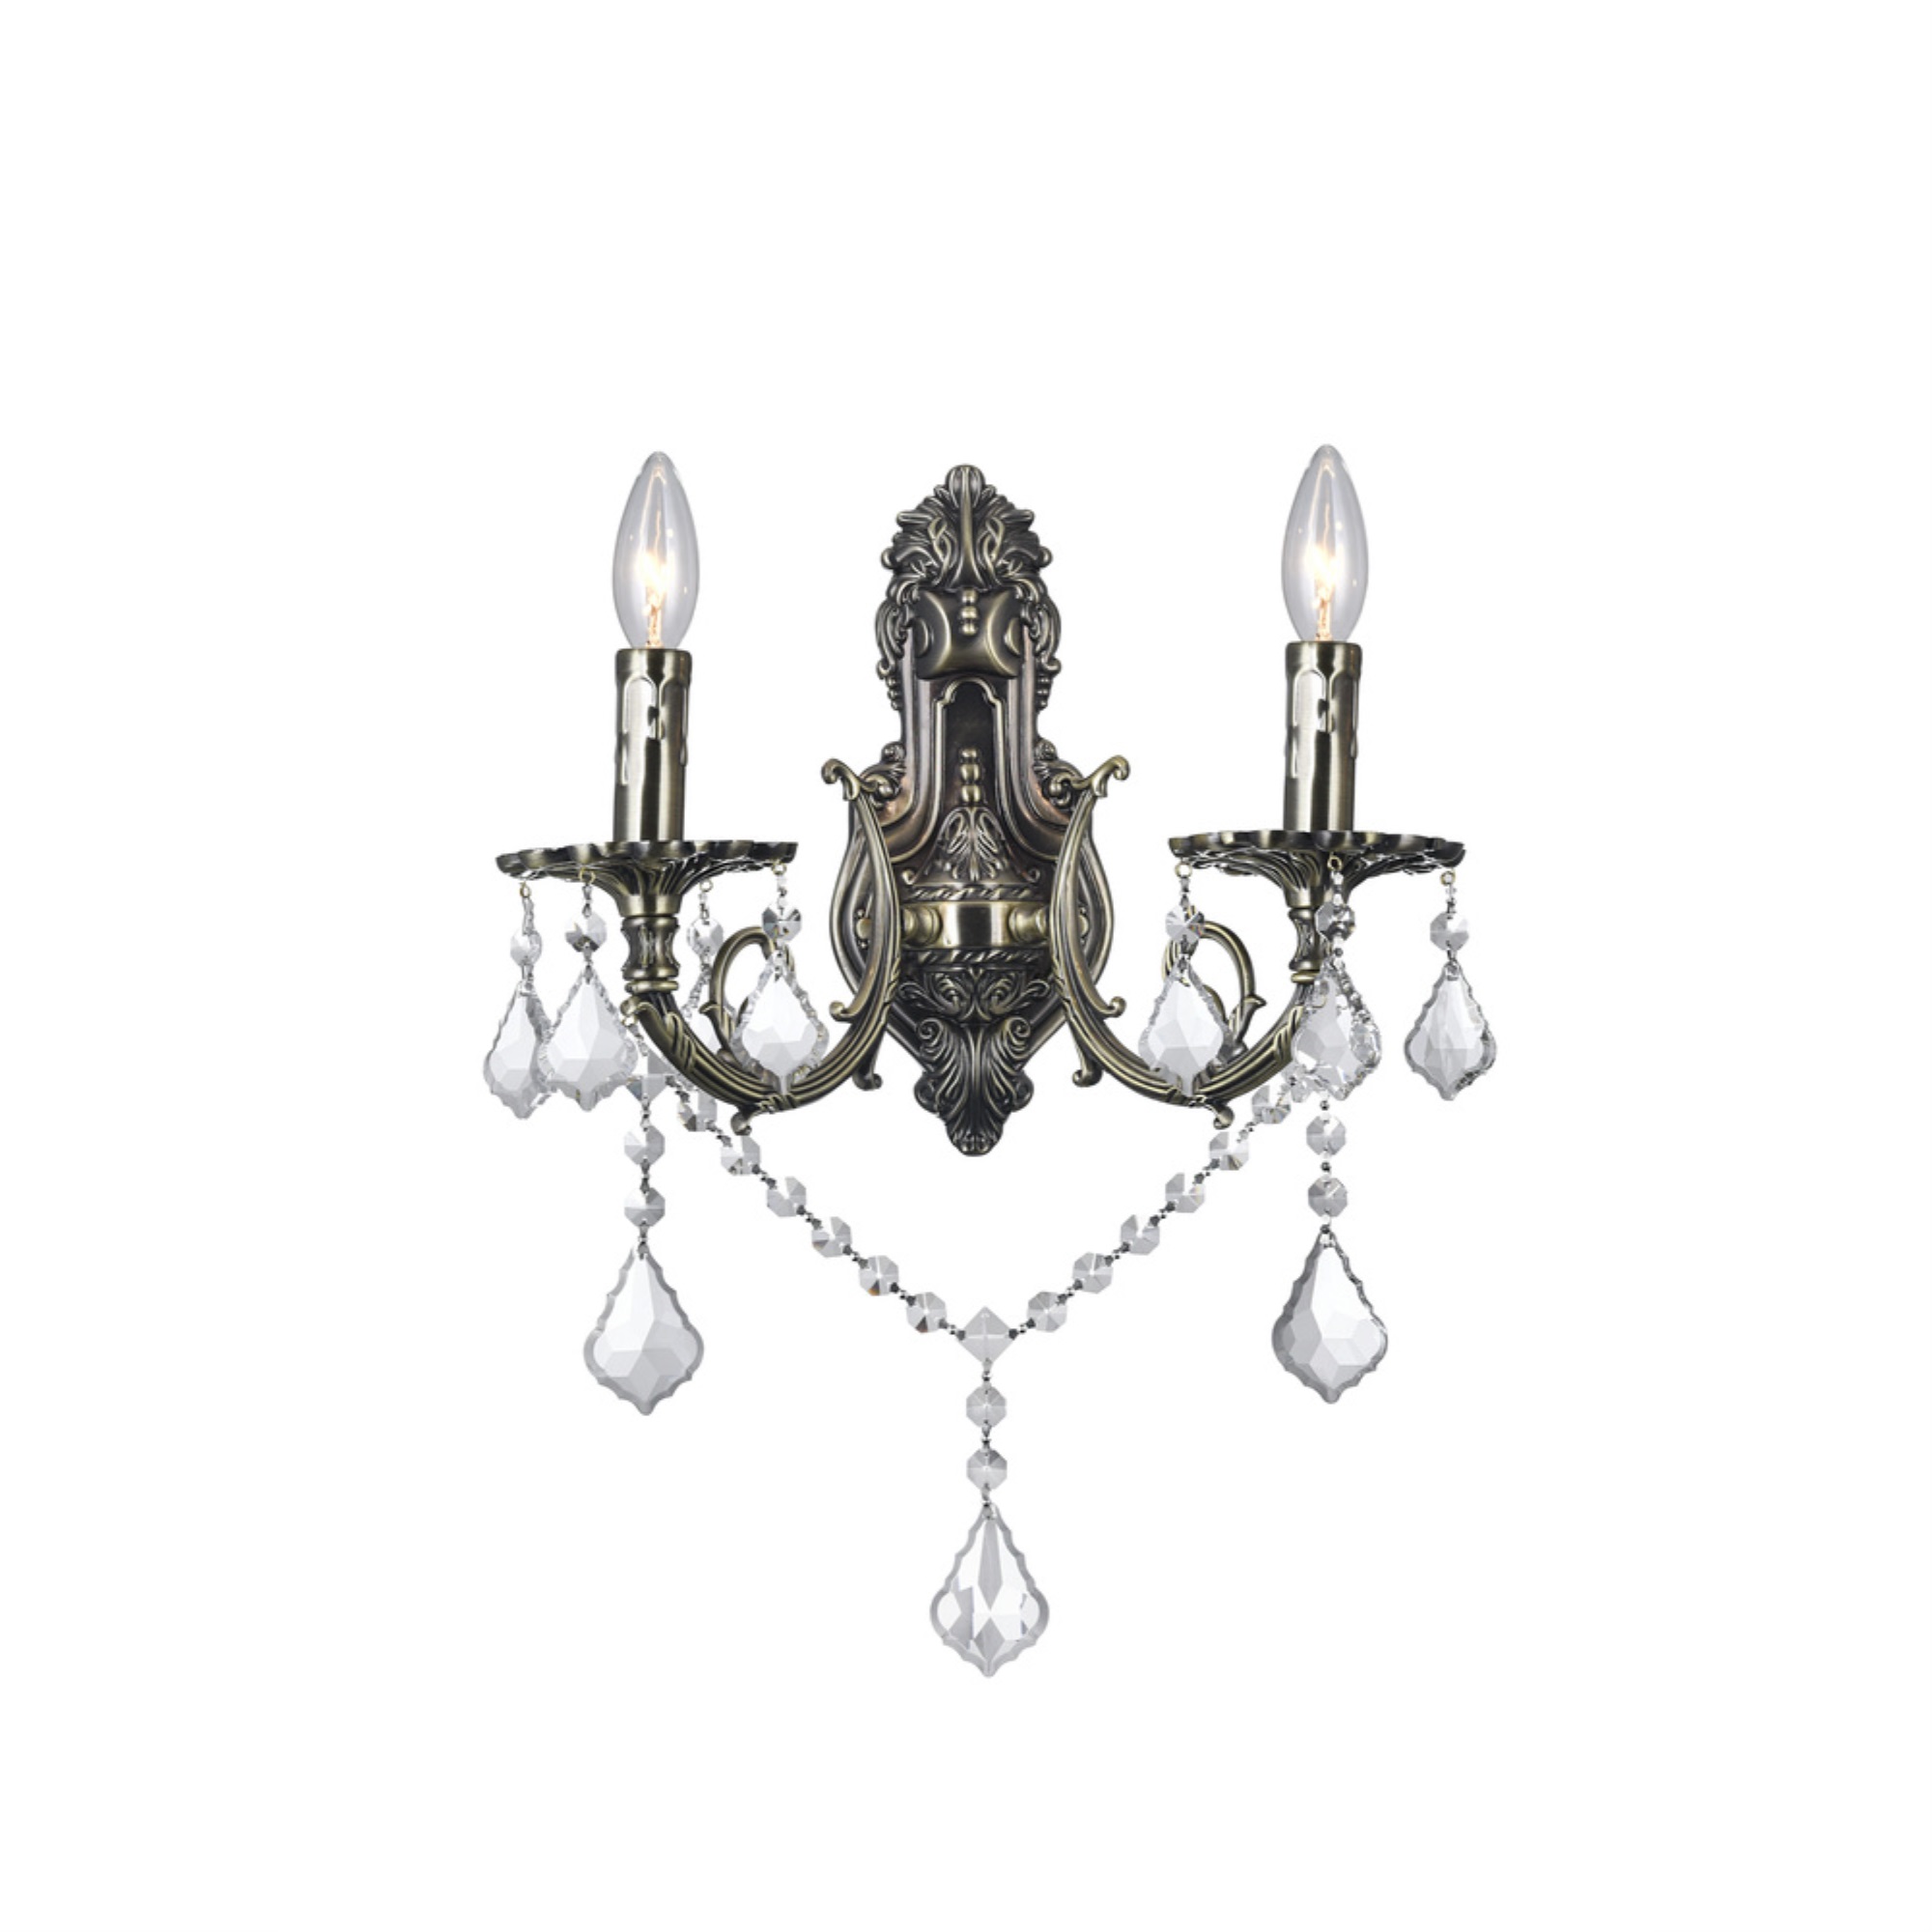 CWI Lighting 2 Light Wall Sconce with Antique Brass finish